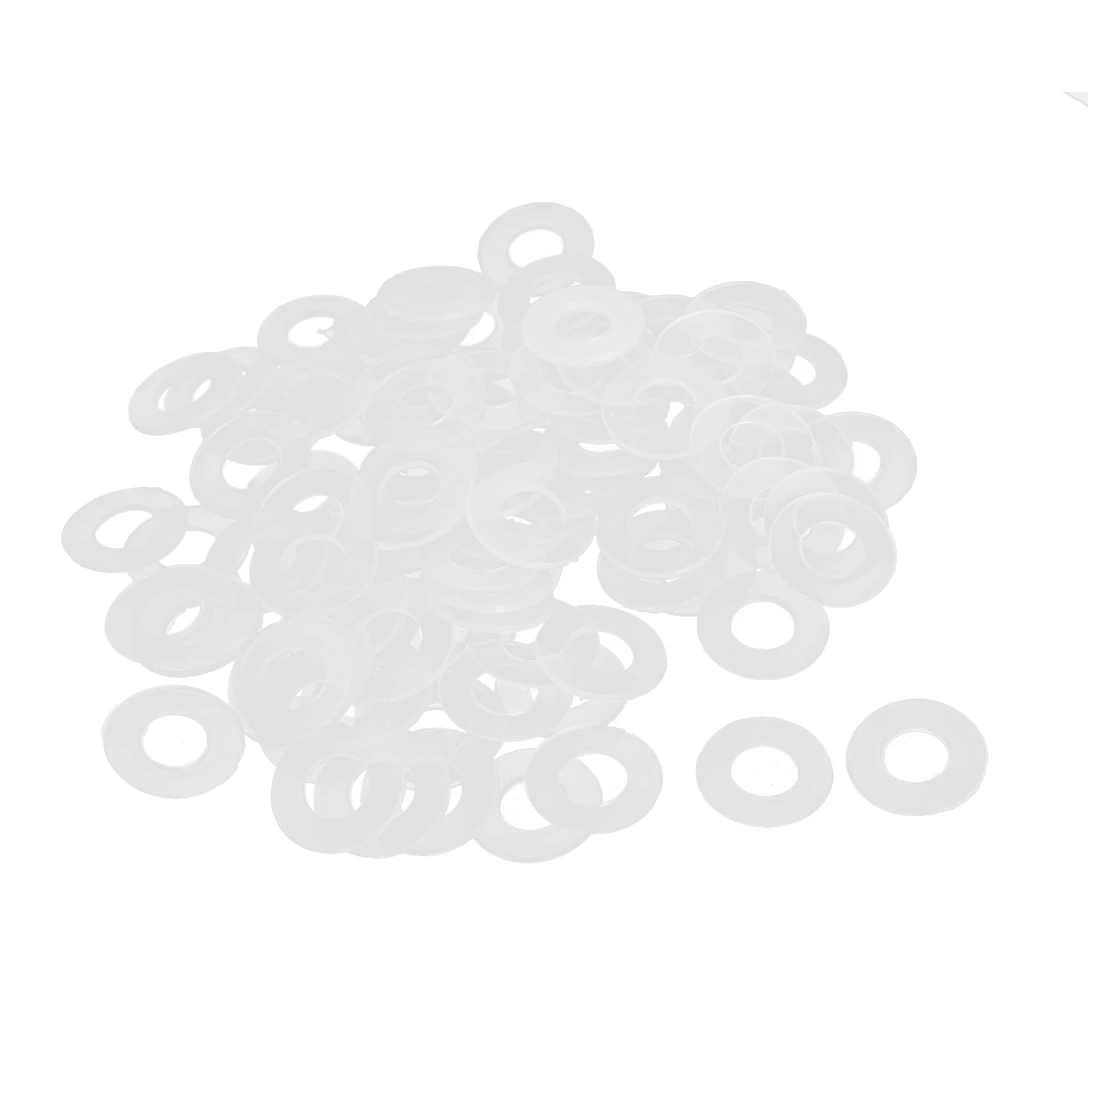 

uxcell 16mm x 8mm x 0.9mm Nylon Flat Insulating Washers Spacer Gasket Clear 100pcs